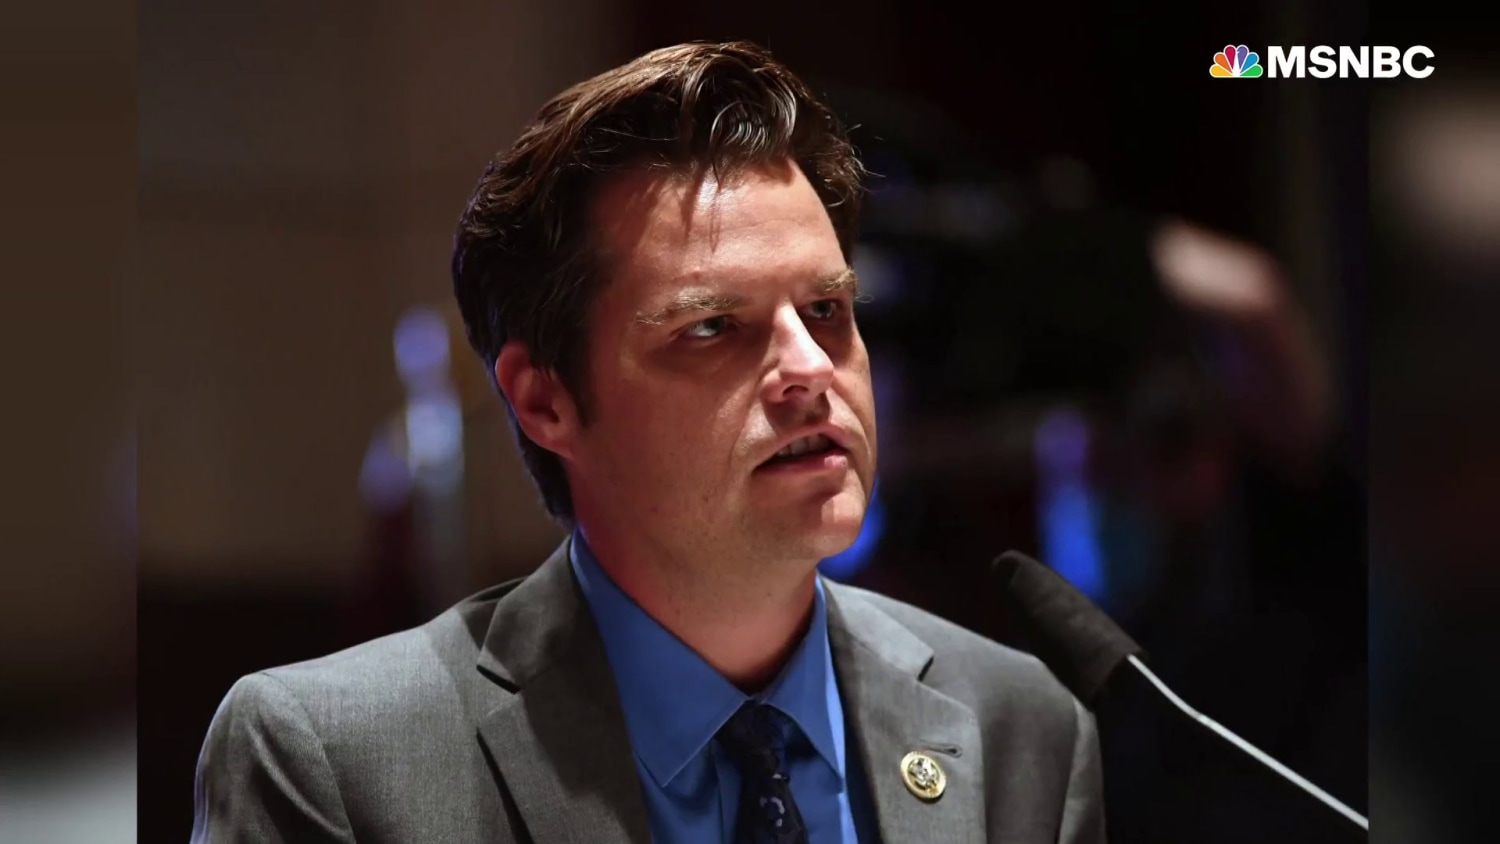 Girls Repping Sex Vidos - The Justice Department's sex trafficking investigation into Rep. Matt Gaetz  seems stalled, attorneys say